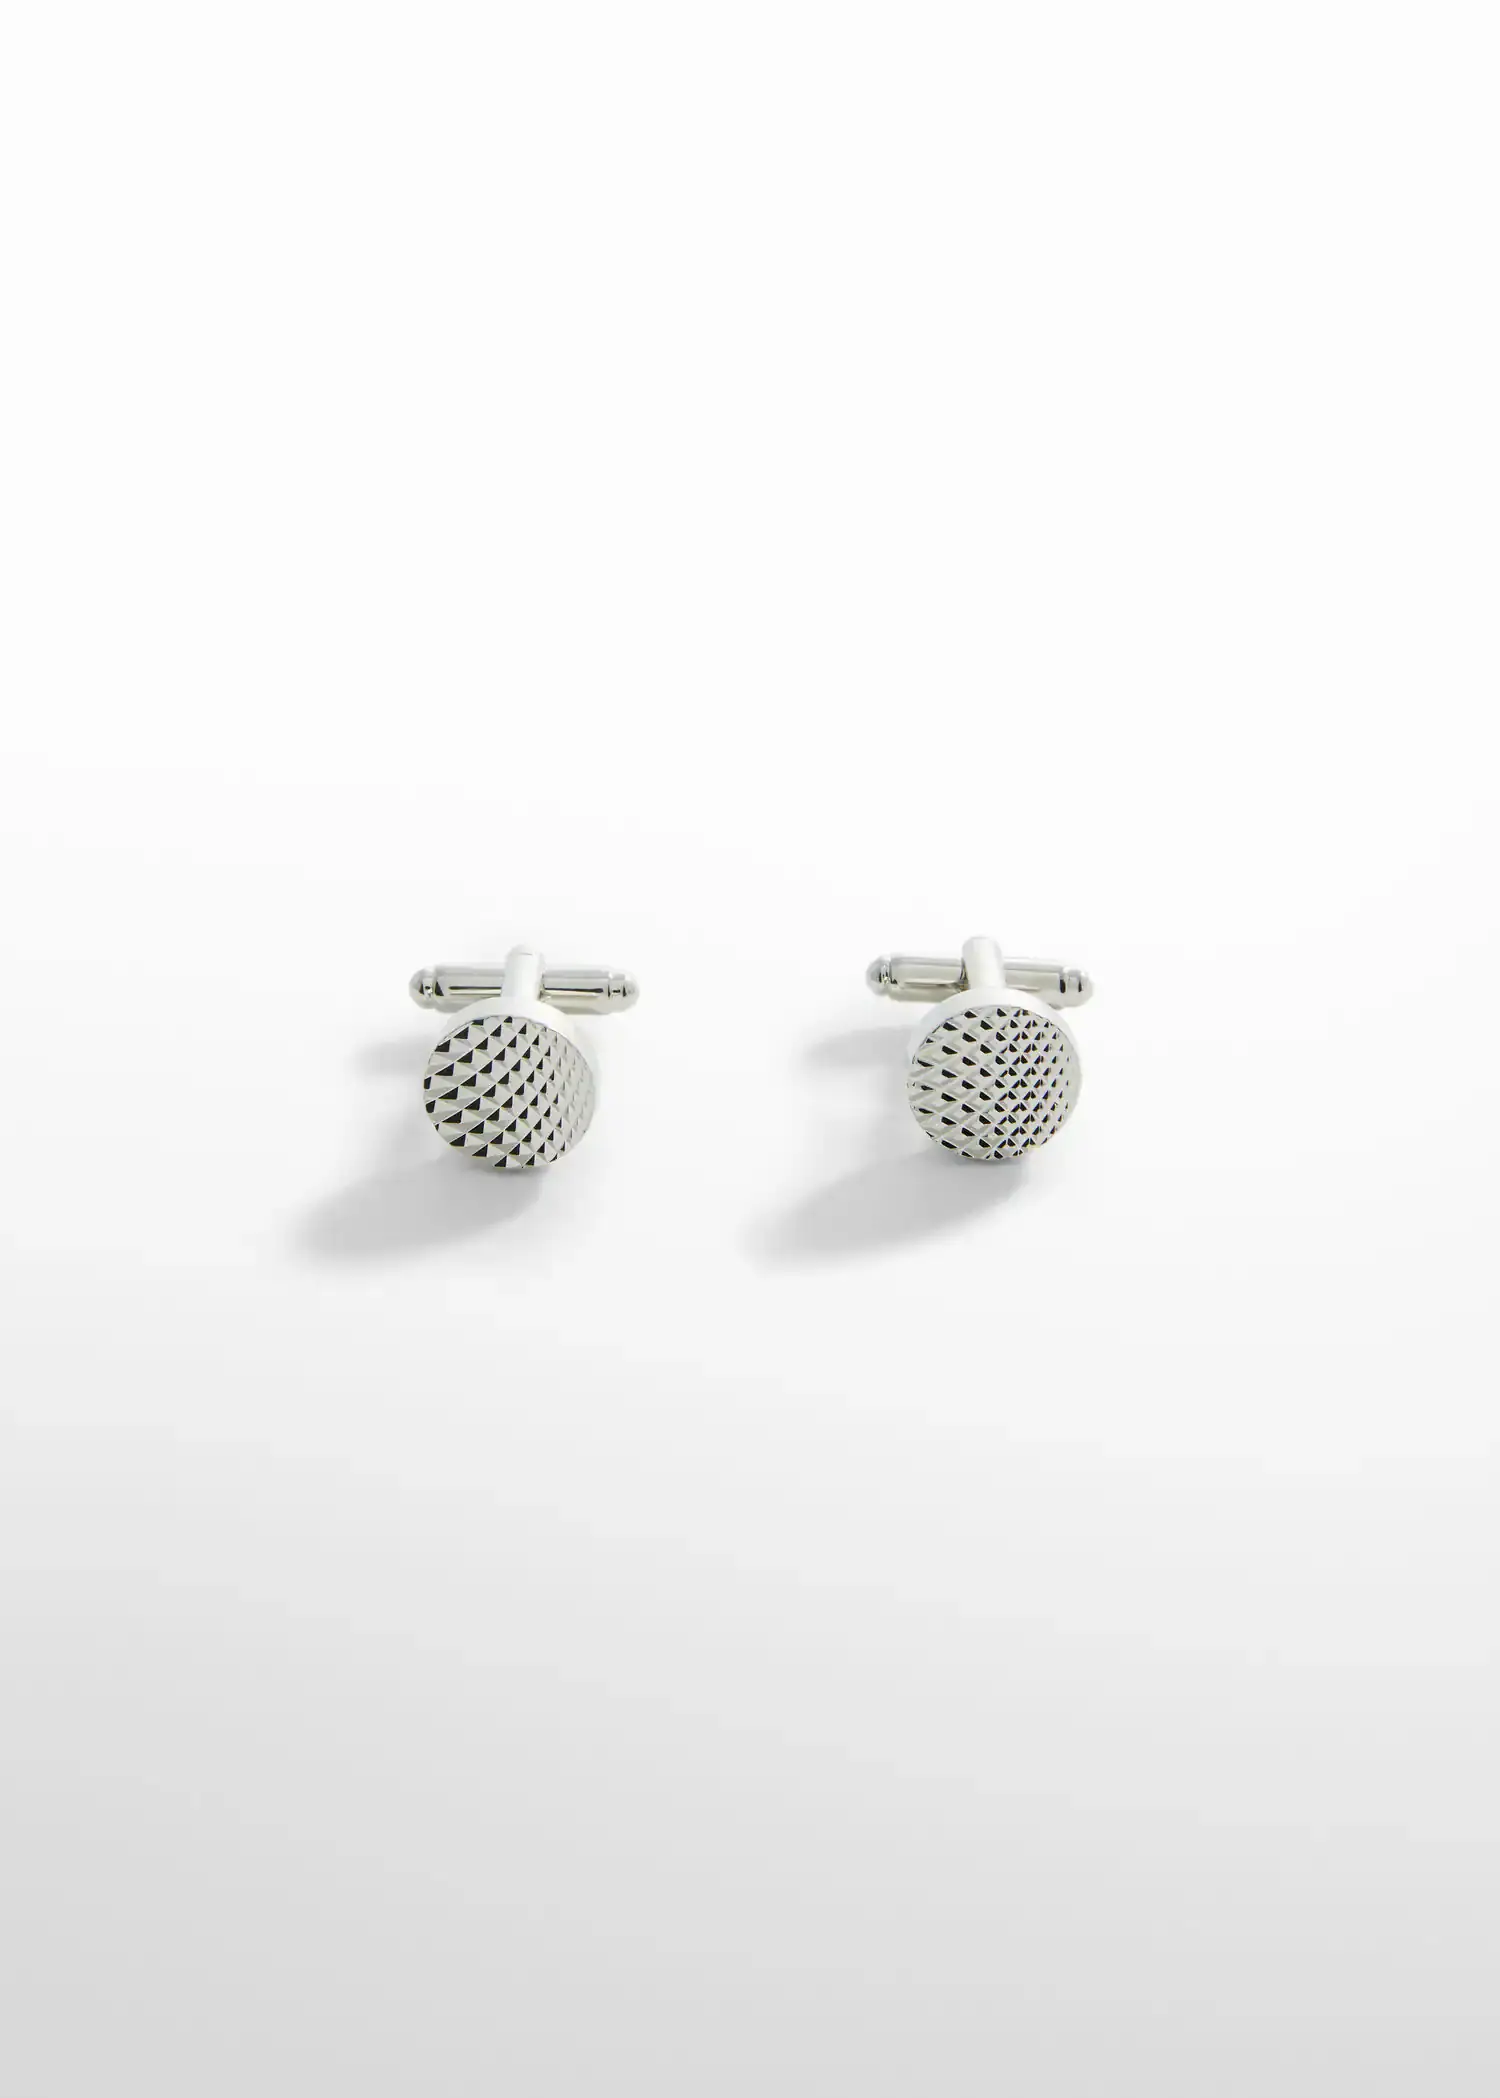 Mango 100% copper geometric cufflinks. a pair of cufflinks on top of a white surface. 